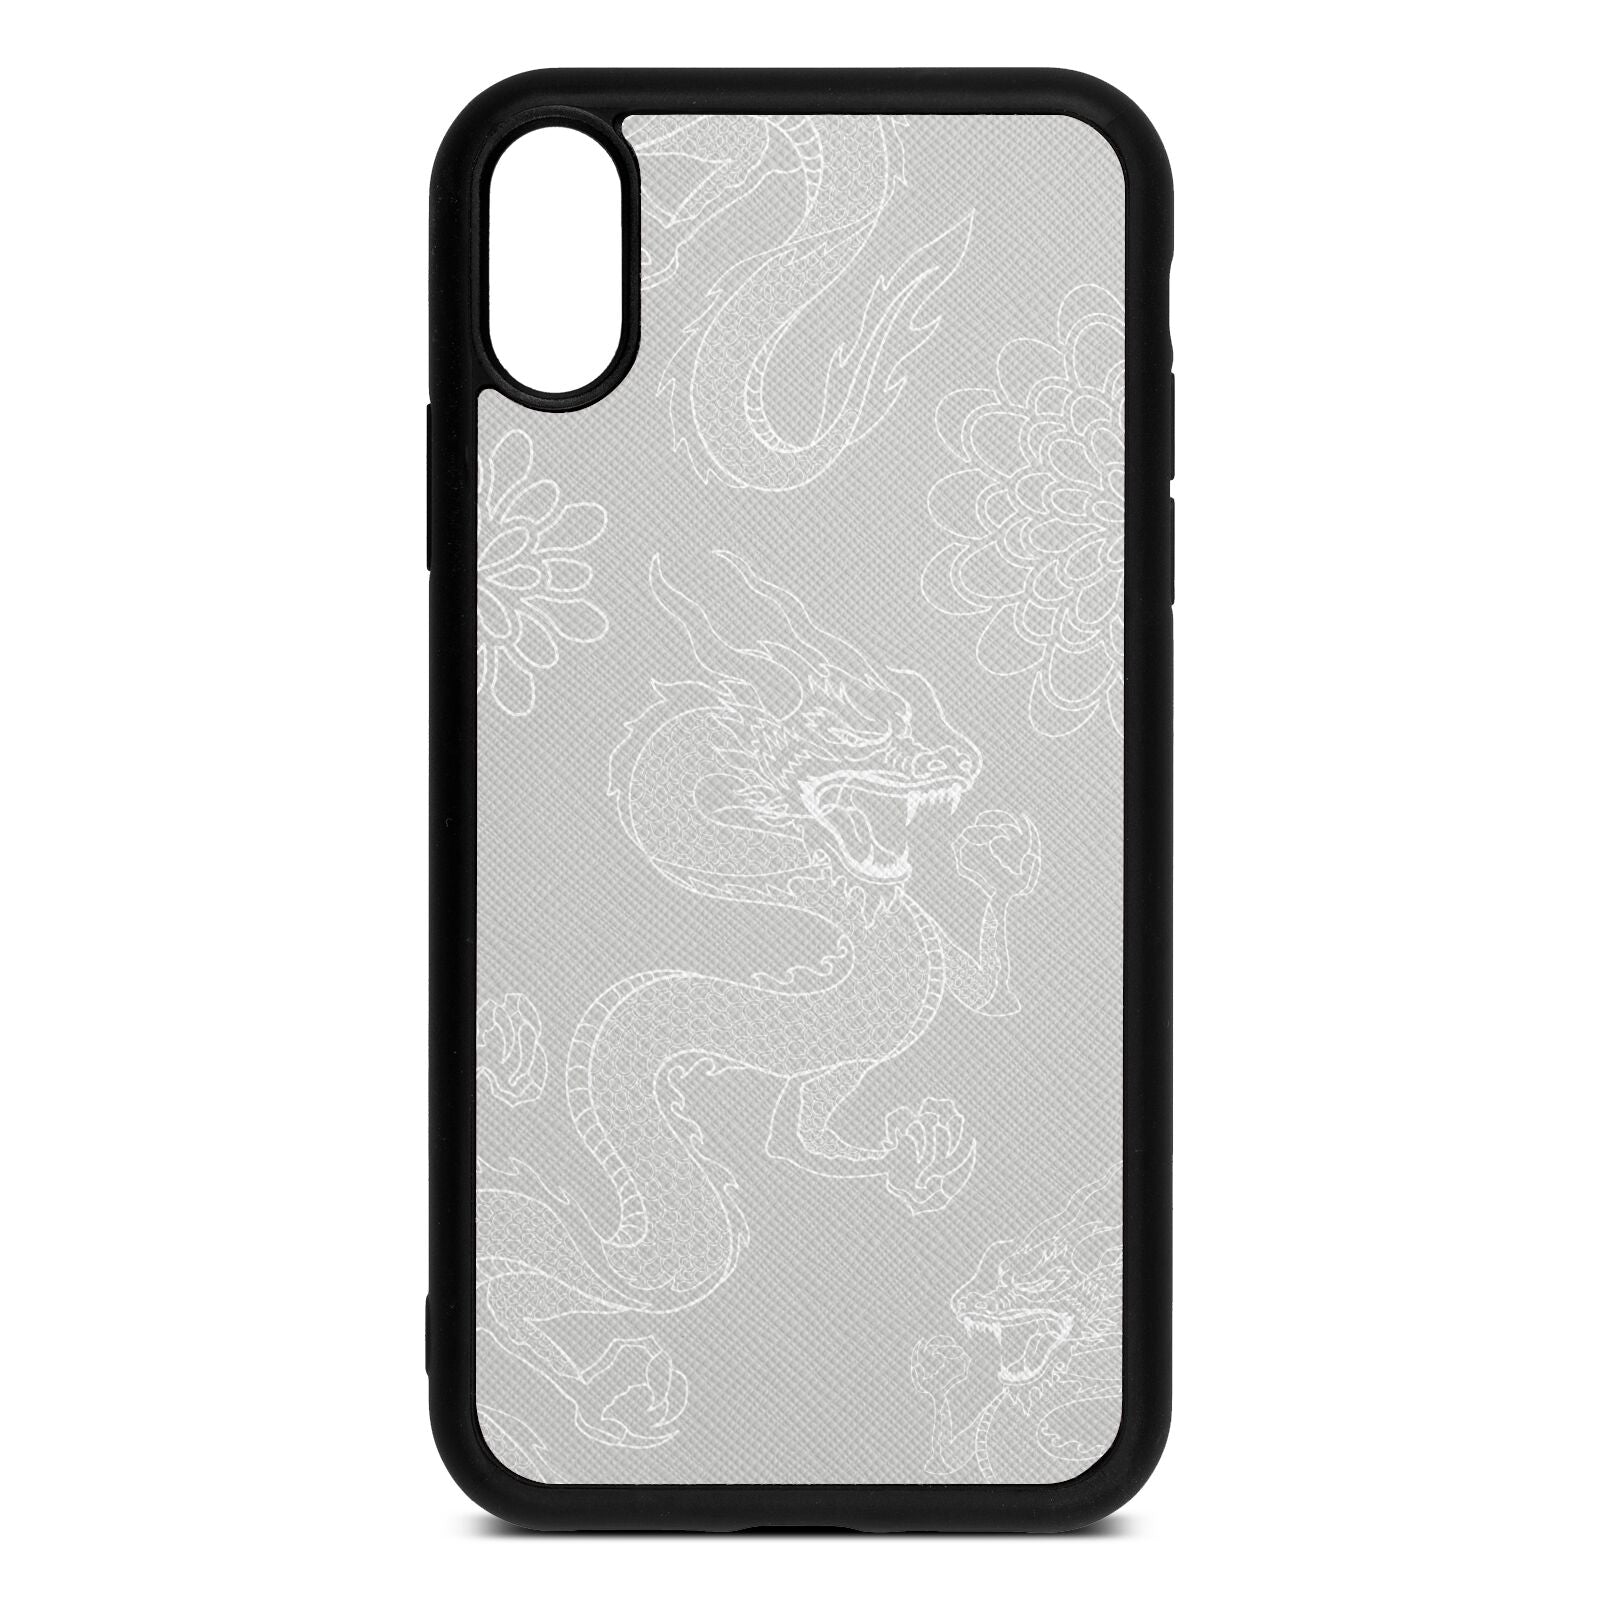 Dragons Silver Saffiano Leather iPhone Xr Case